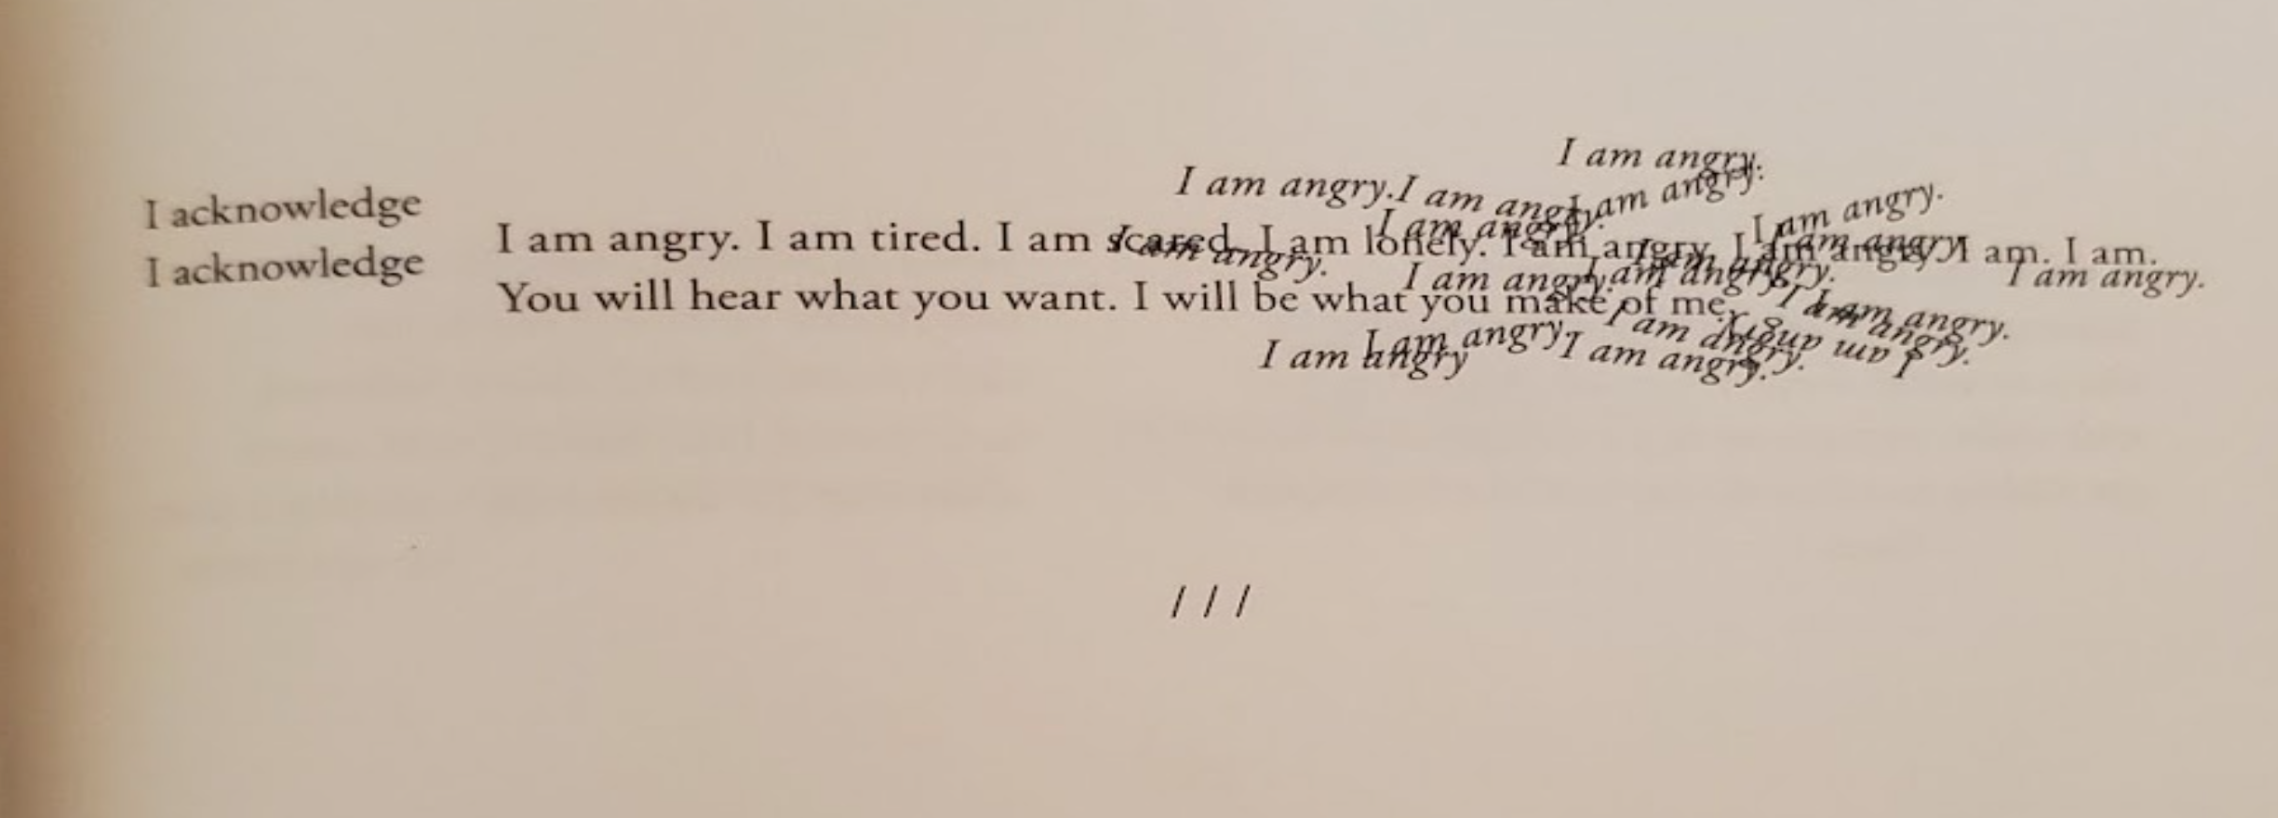 Image description: The words “I acknowledge” repeated on top of each other, then a line “I am angry. I am tired. I am scared” that has the same phrase repeated in italics intersecting with the line. Under that line is the phrase “You will hear what you want. I will be what you make of me.”